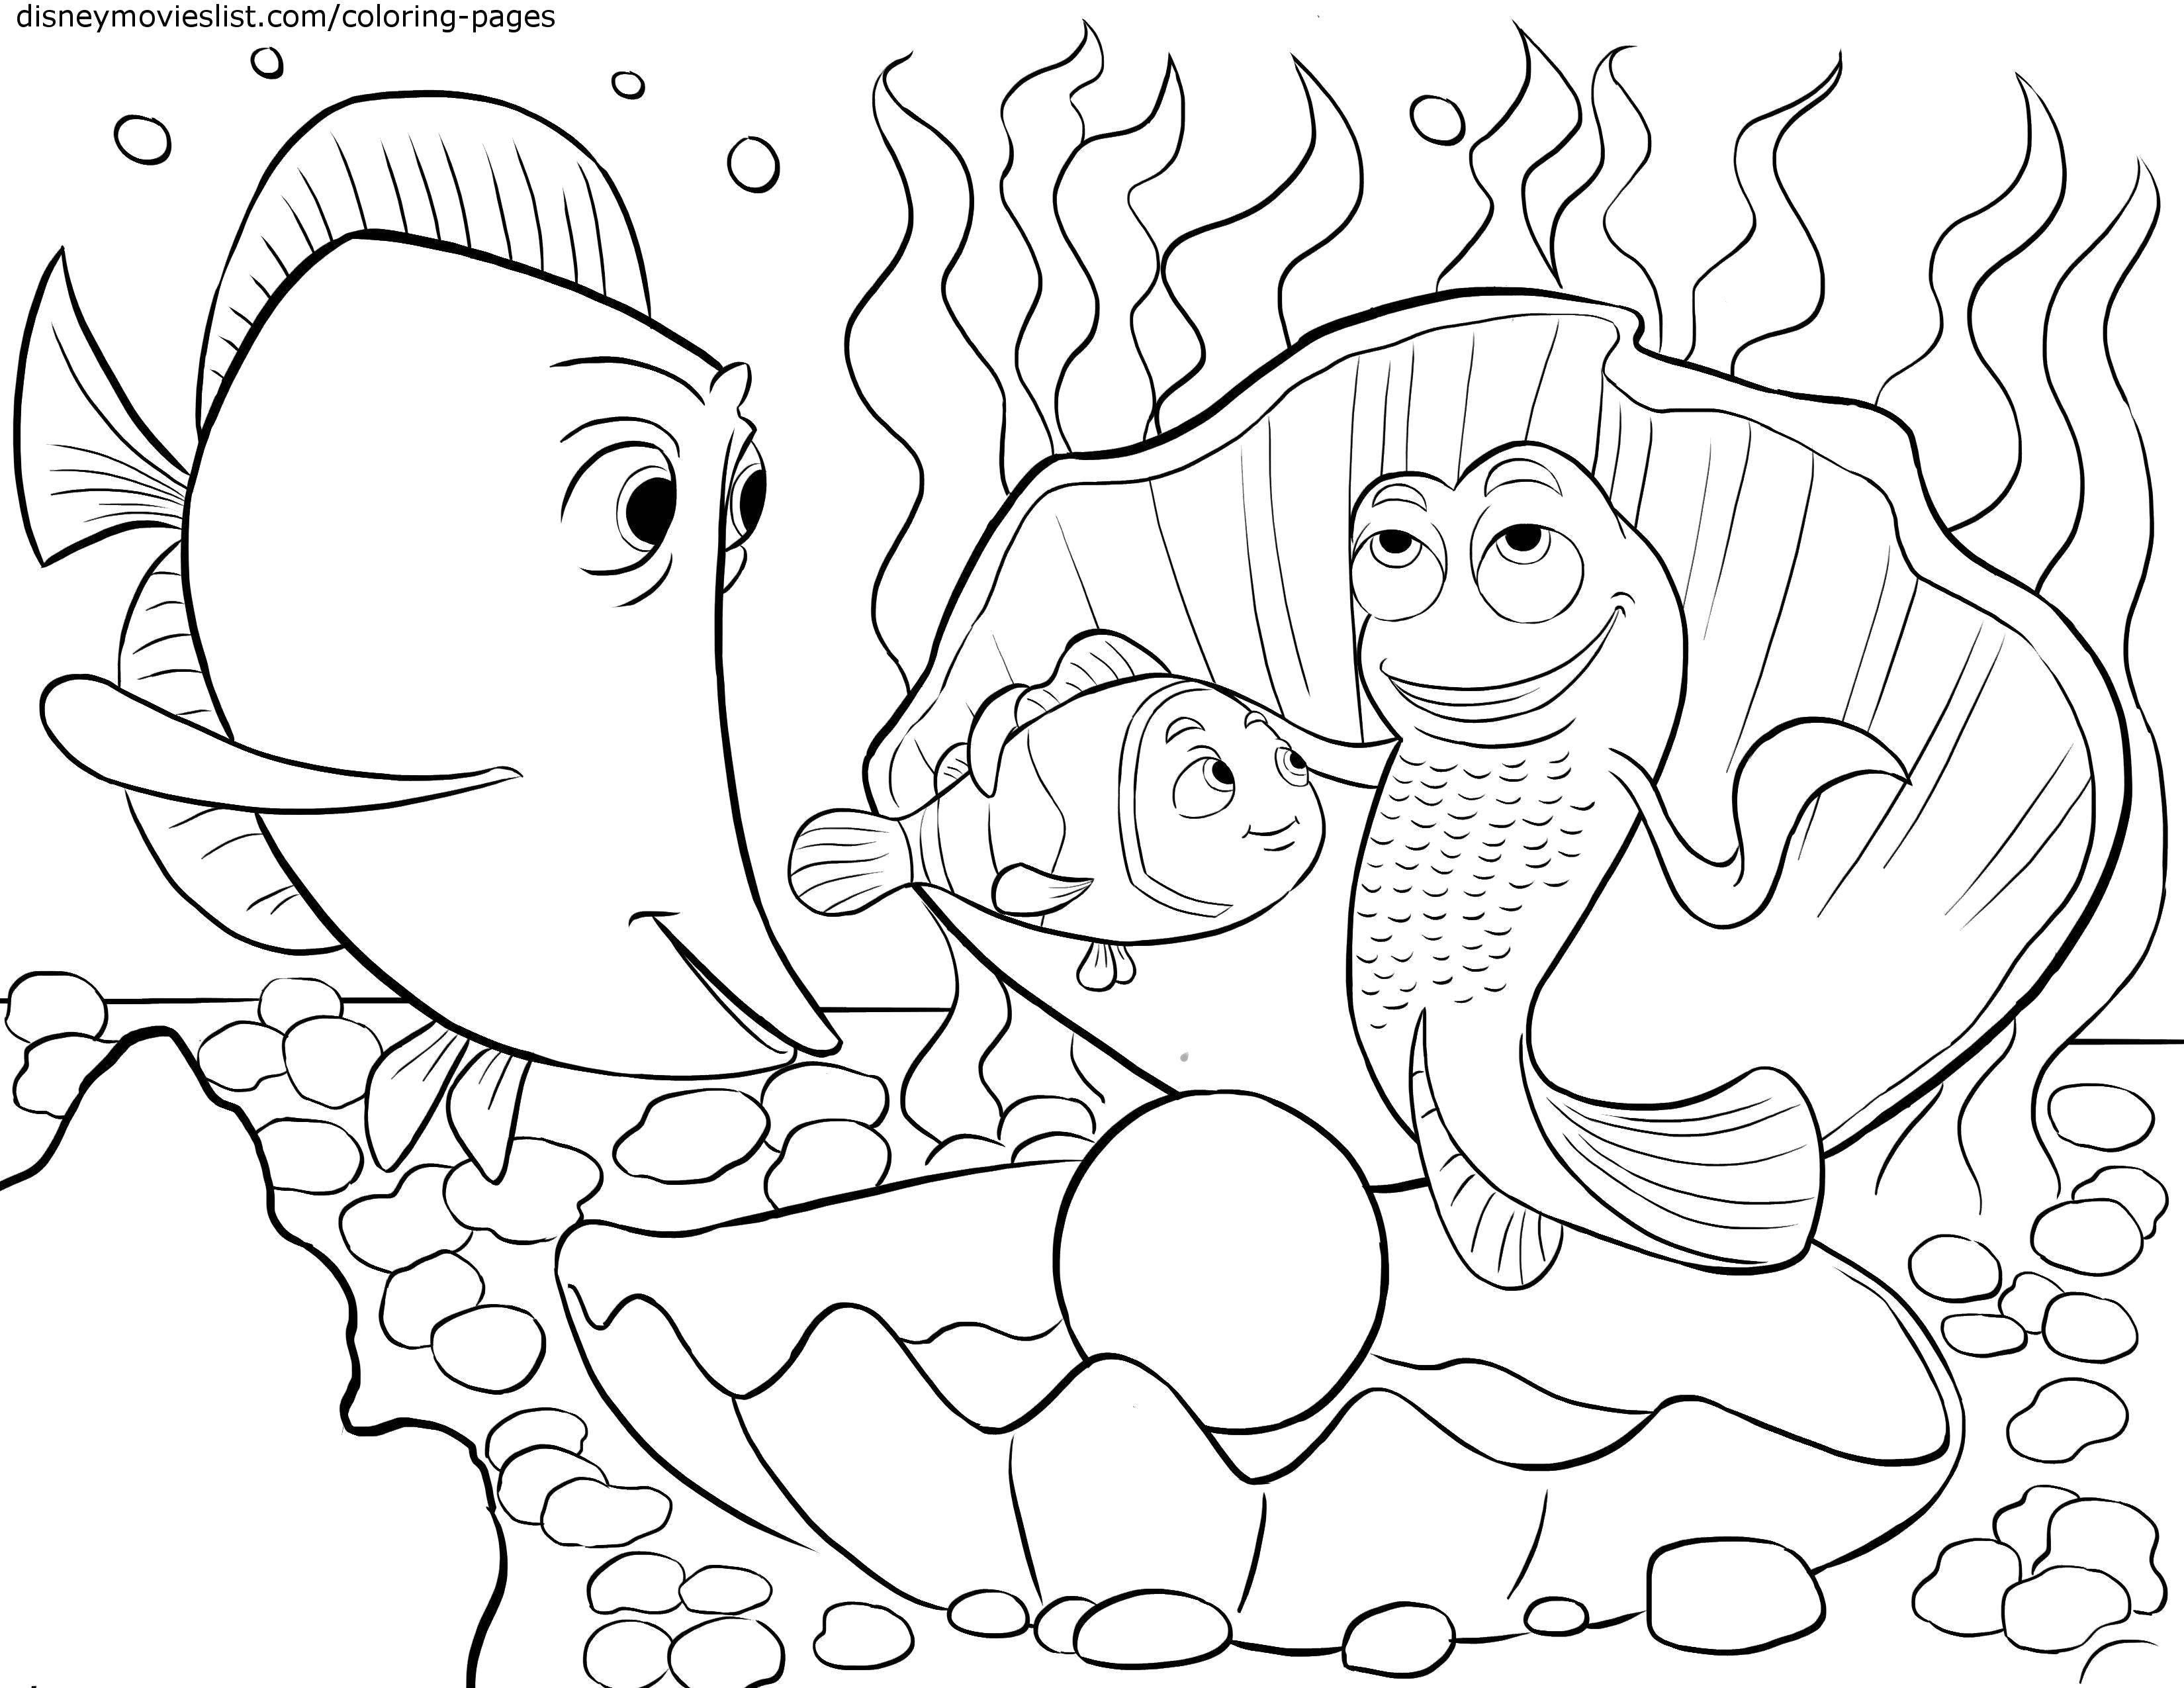 Coloring Nemo and the other fish. Category Sea animals. Tags:  Underwater world, fish.